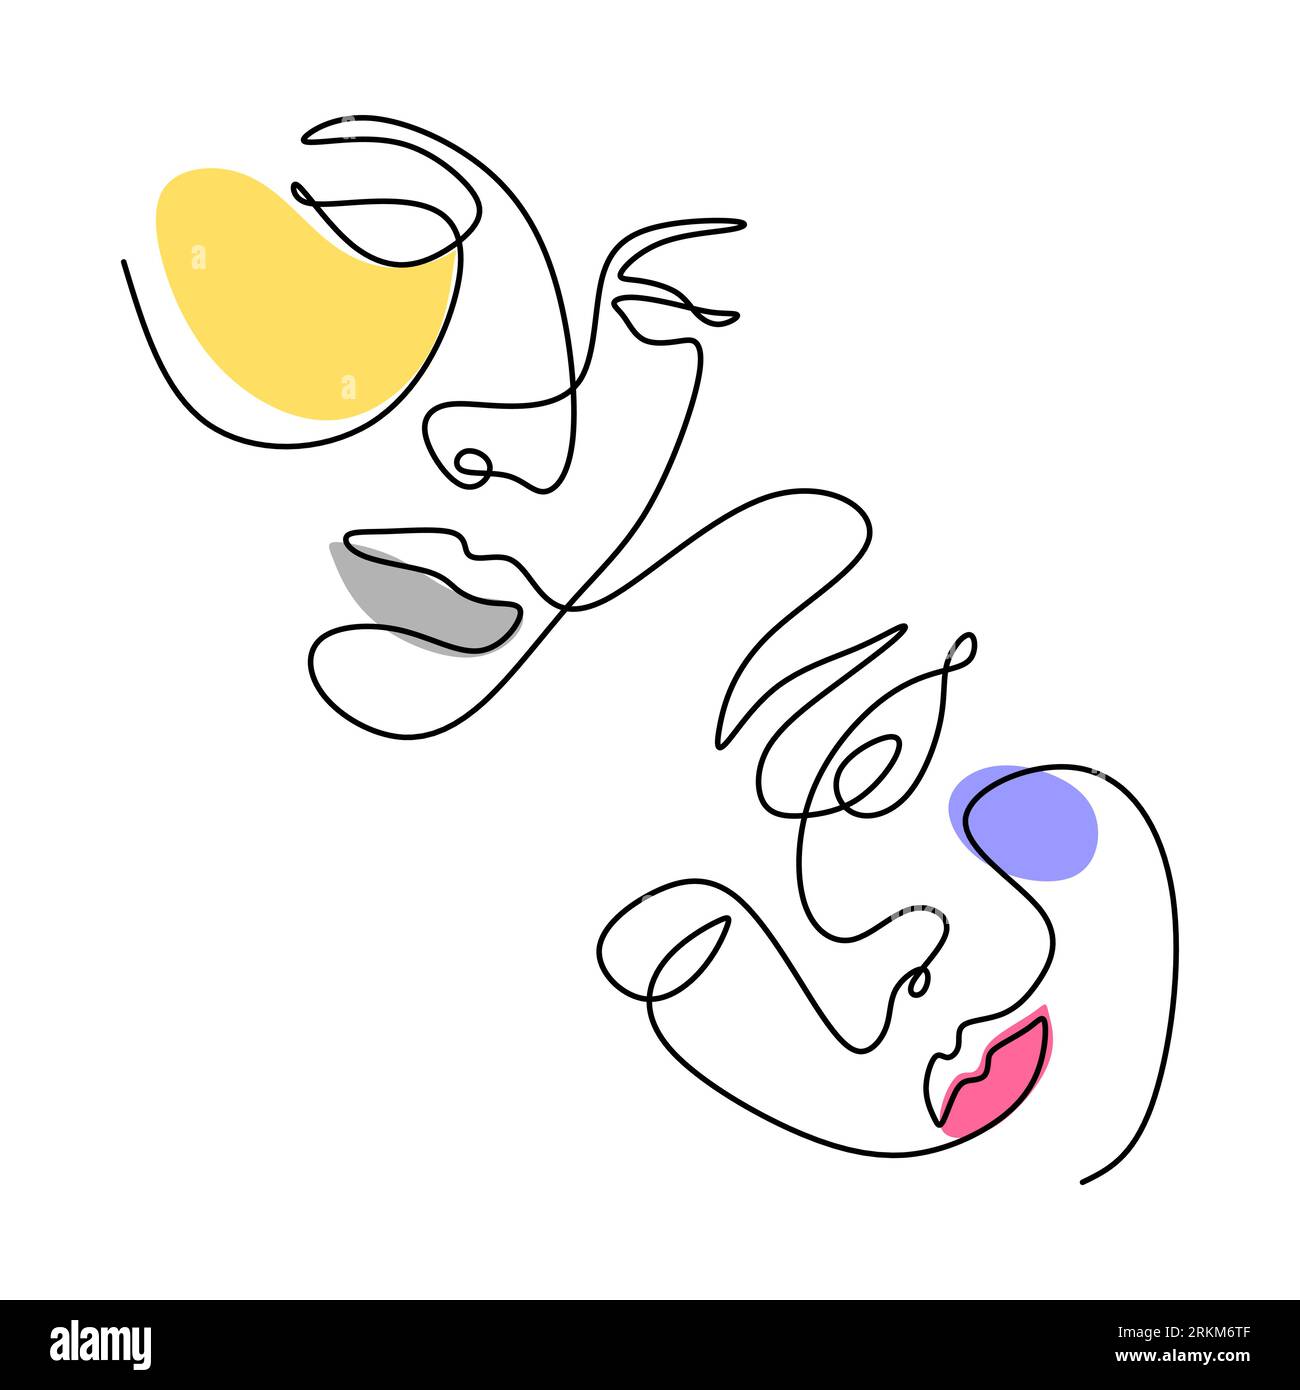 Abstract man and woman one continuous line vector drawing. surreal hand drawn sketch minimalism vector illustration. Stock Vector